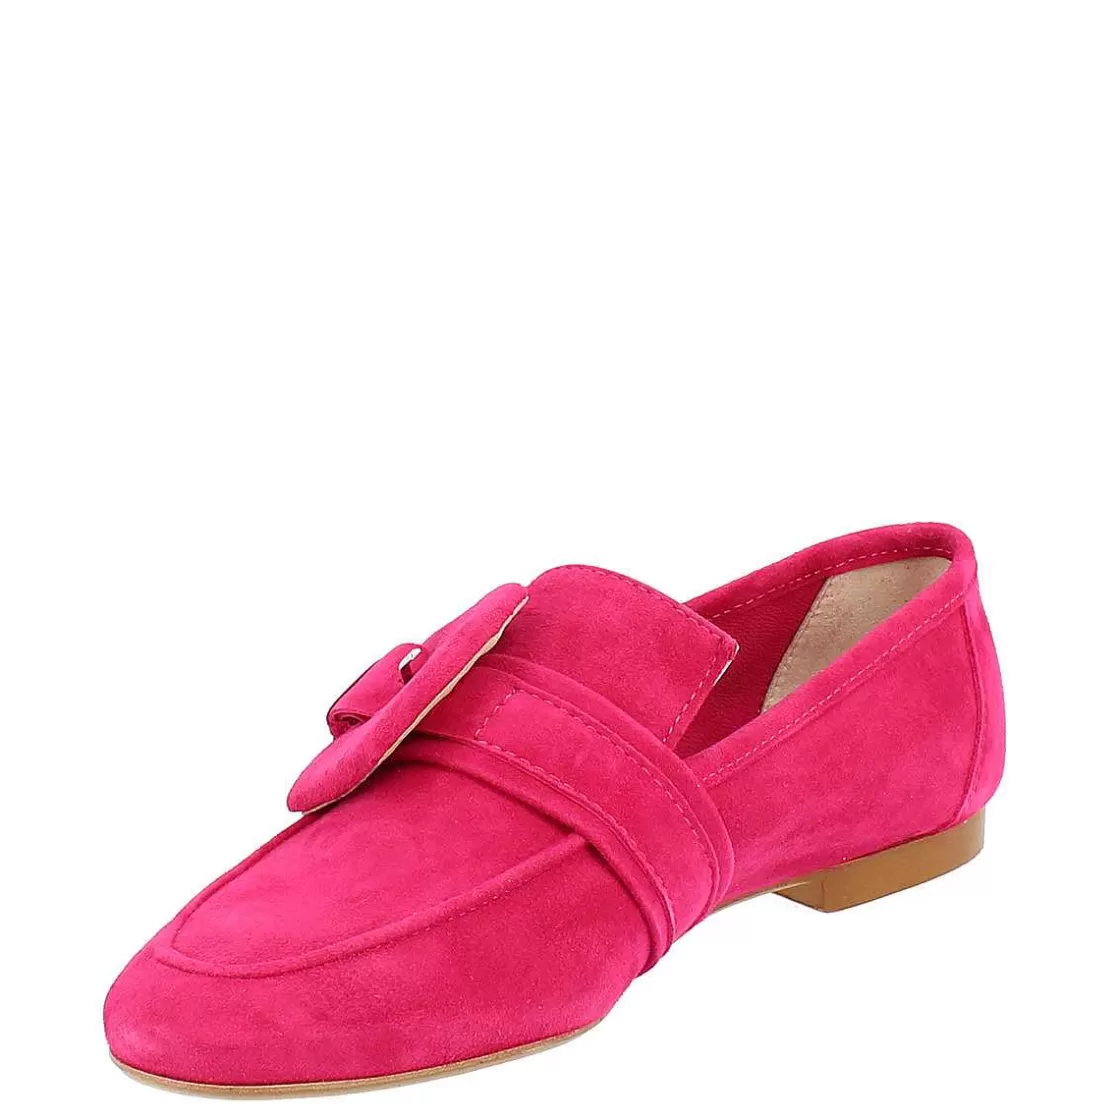 Leonardo Women'S Moccasin In Fuchsia Suede Handmade With Wrapped Buckle. Hot